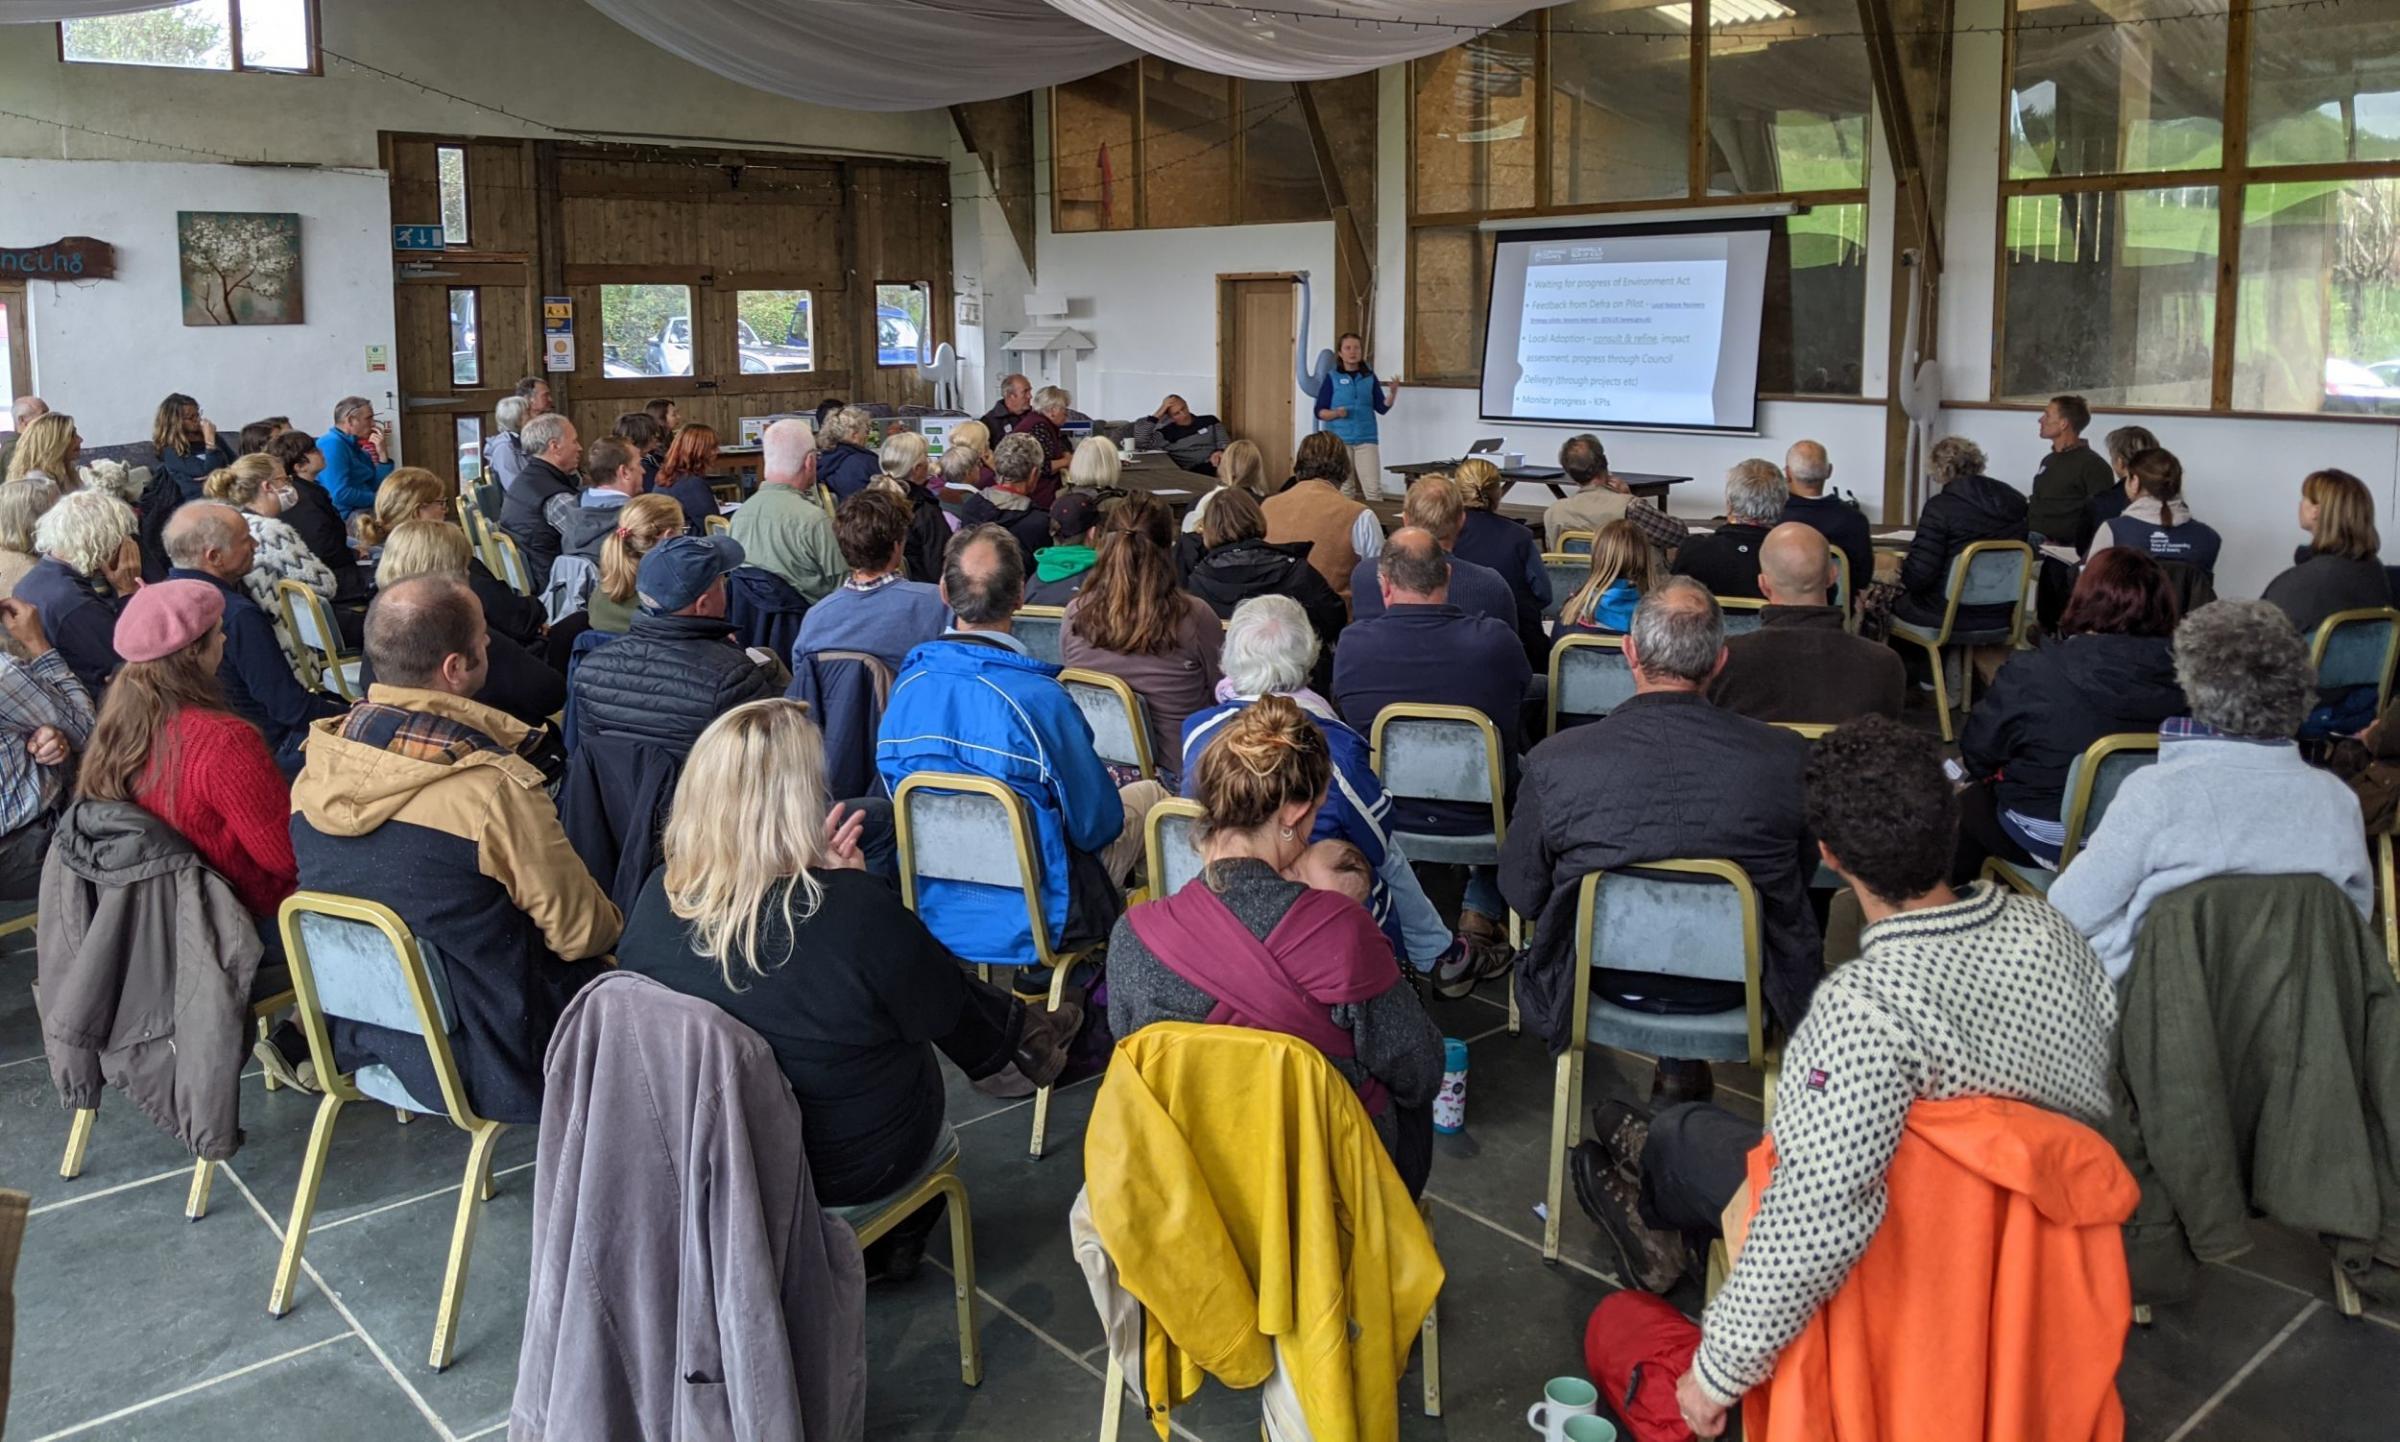 The a fully booked event took place at Rosuick Farm near Goonhilly on the Lizard Peninsula